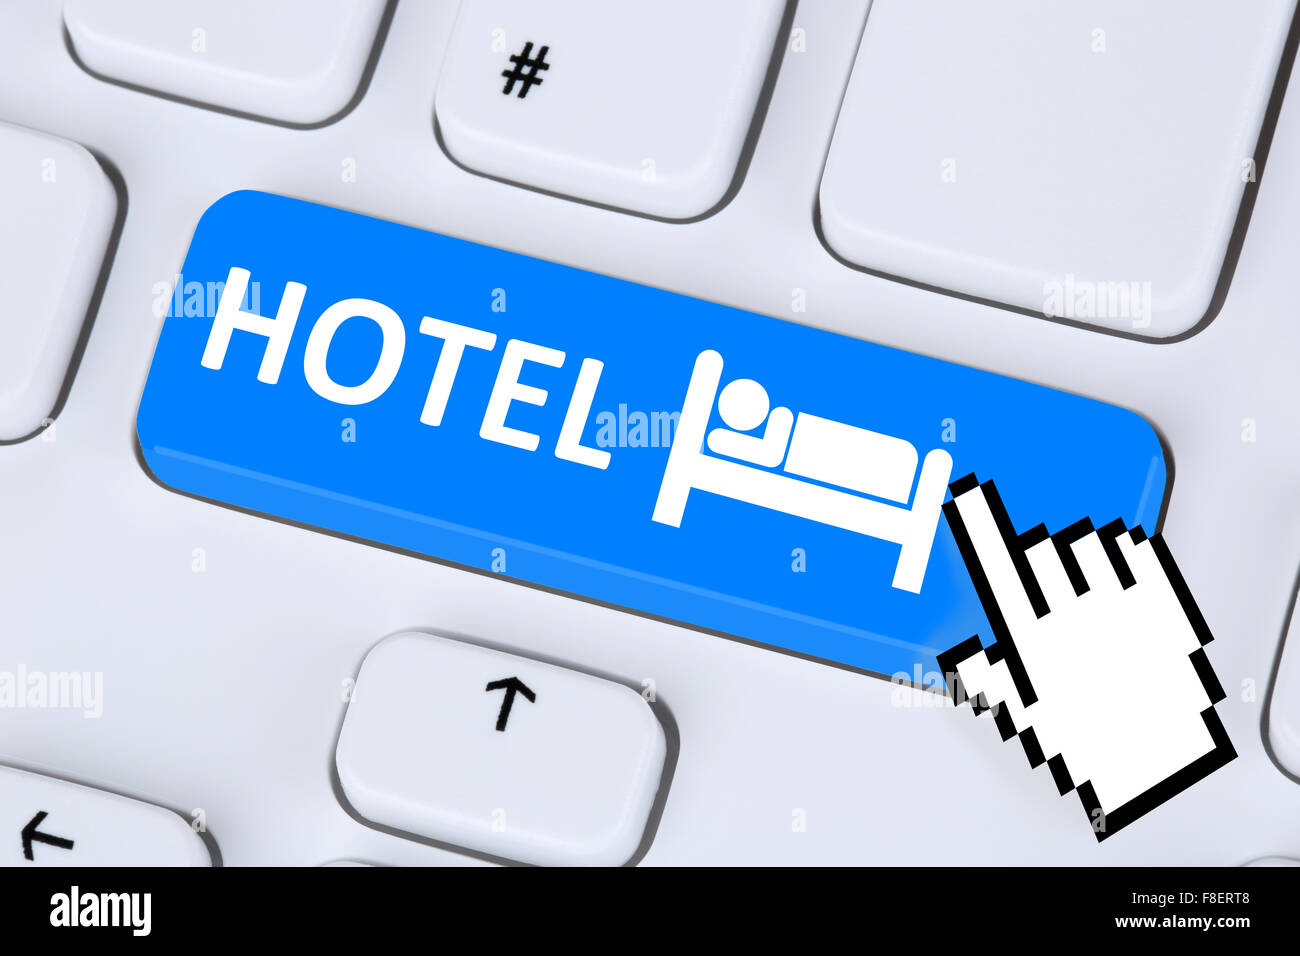 Hotel room online internet booking computer concept Stock Photo